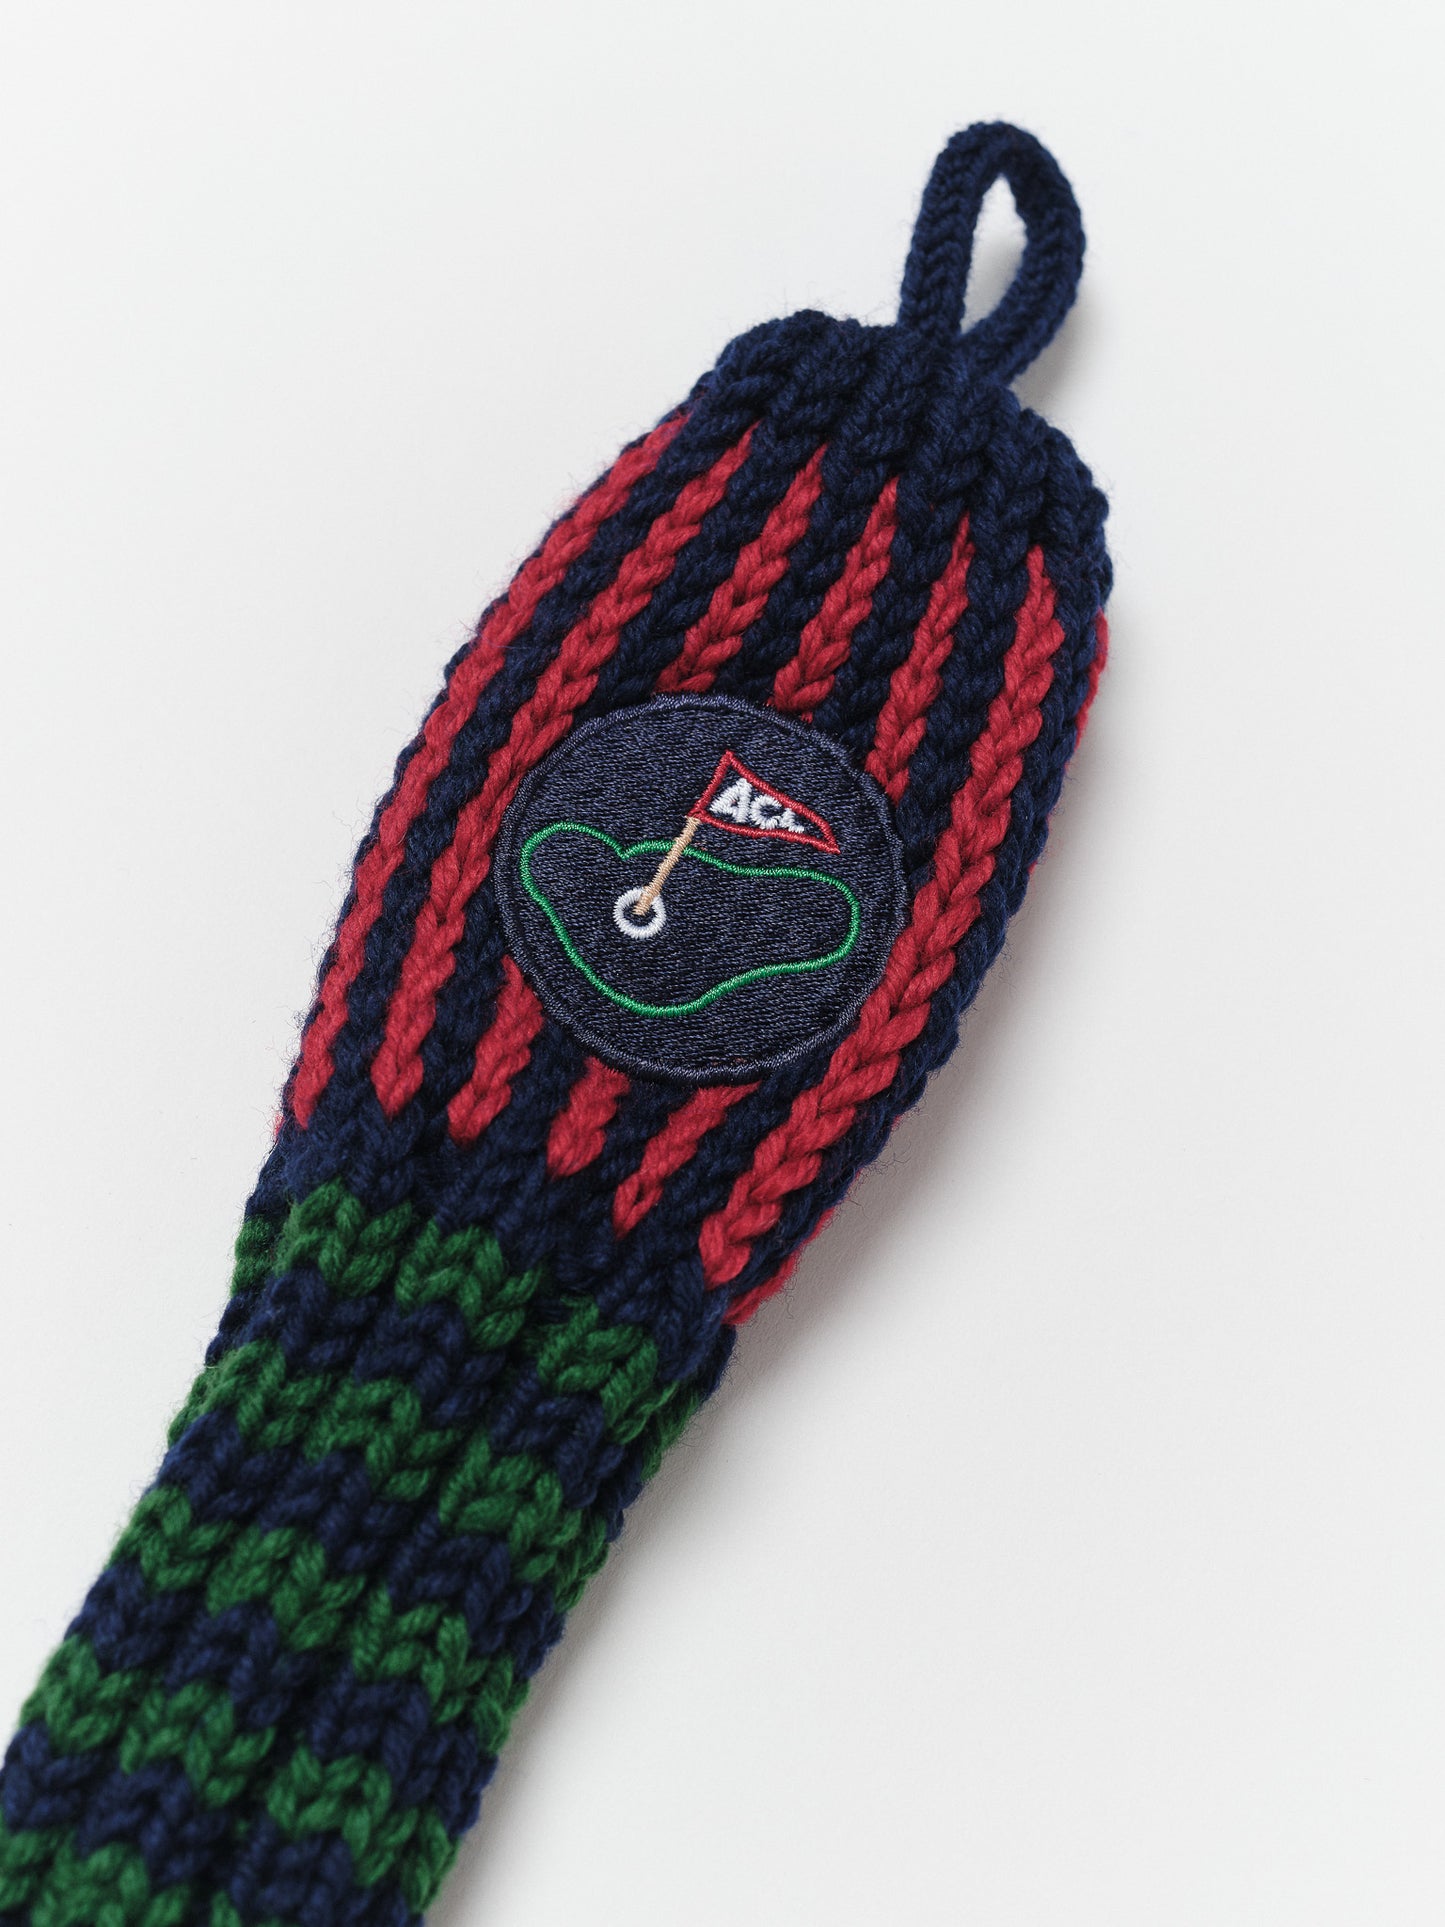 Fore Ewe x ACL GOLF Hybrid Headcover in Navy